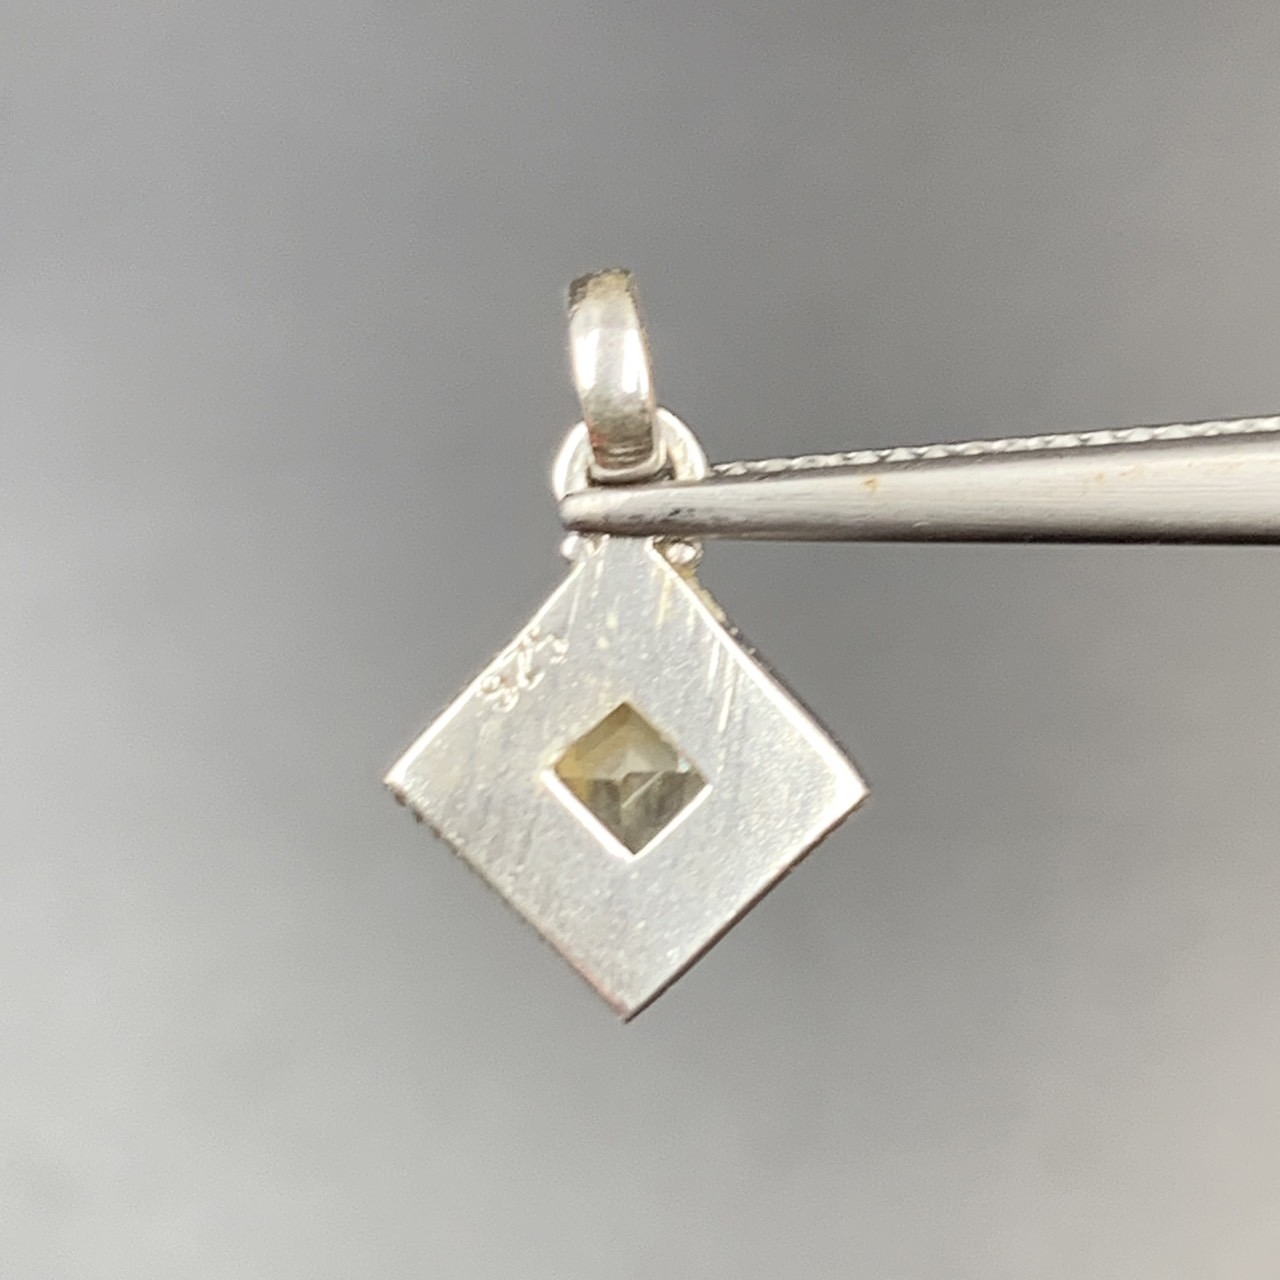 Natural Citrine & Silver Pendant. - Image 2 of 3